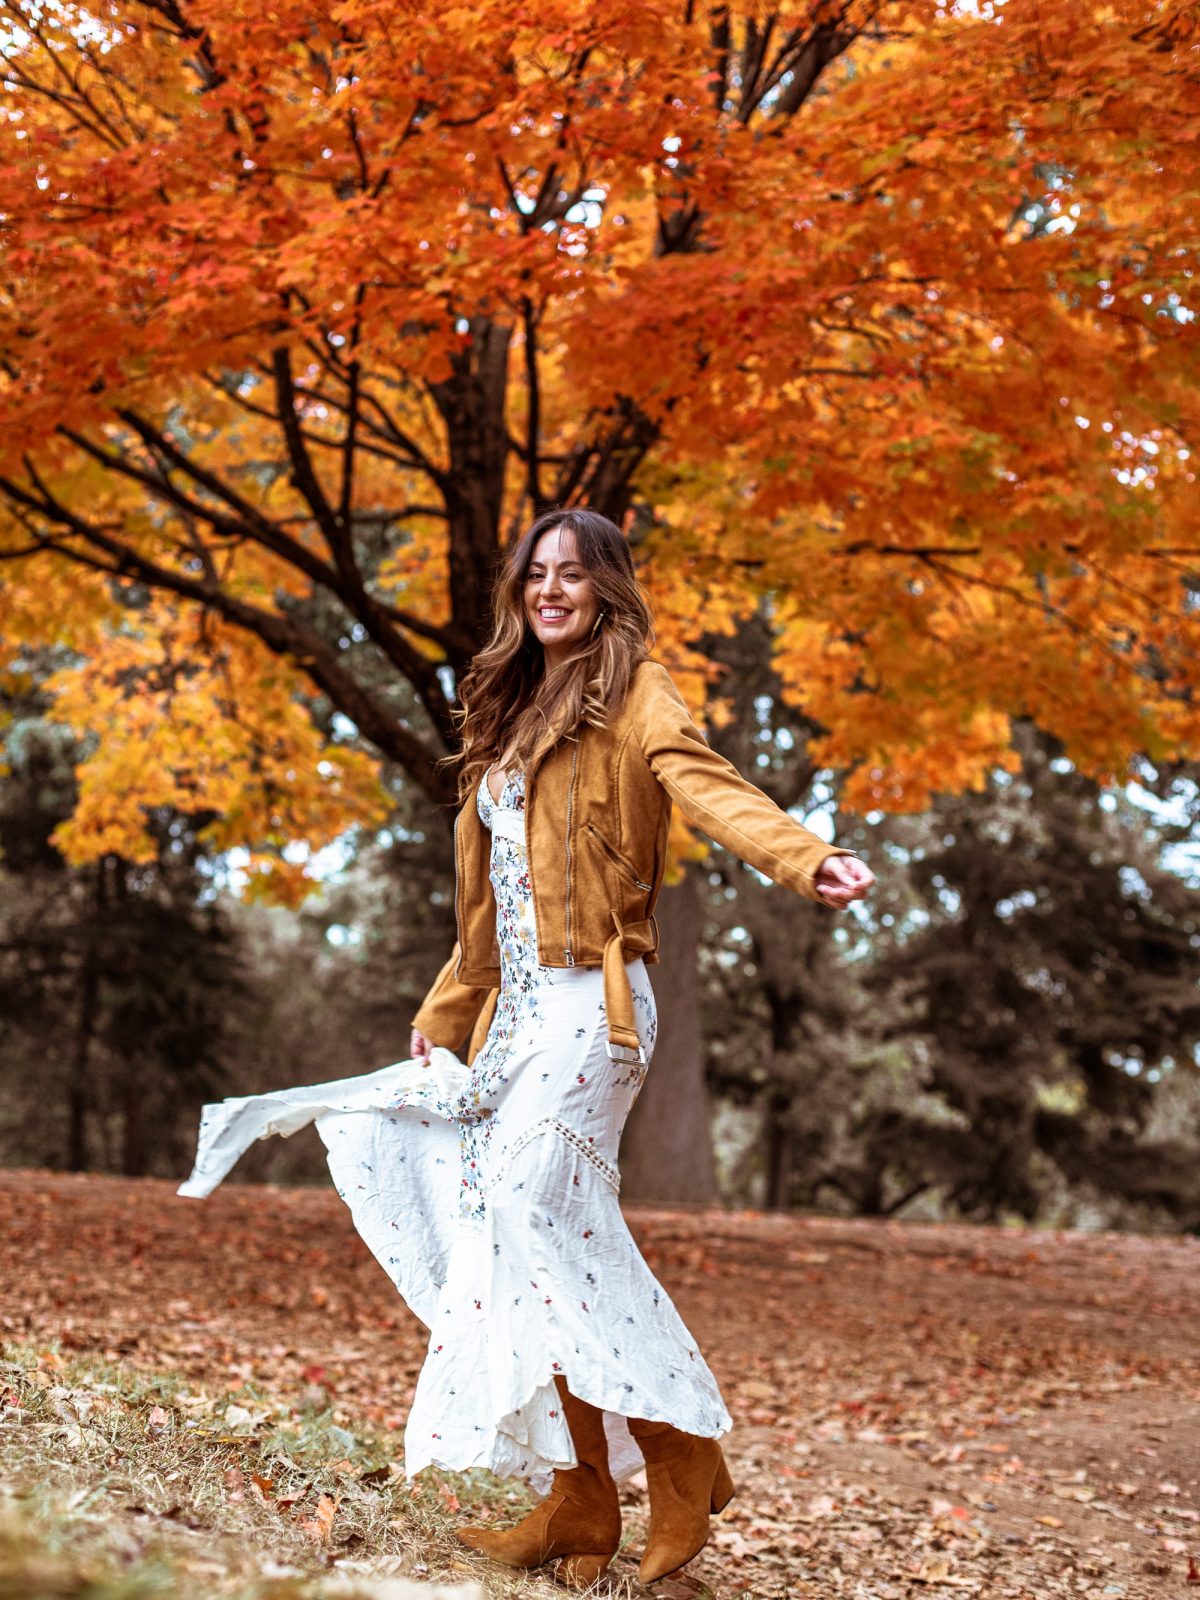 How to Wear a Summer Dress Into Fall, free people maxi dress, fall outfit ideas, summer dress in the fall, otk boots, over the knee boots, fall style, what to wear for fall, bb dakota jacket, goodnight macaroon over the knee boots styled